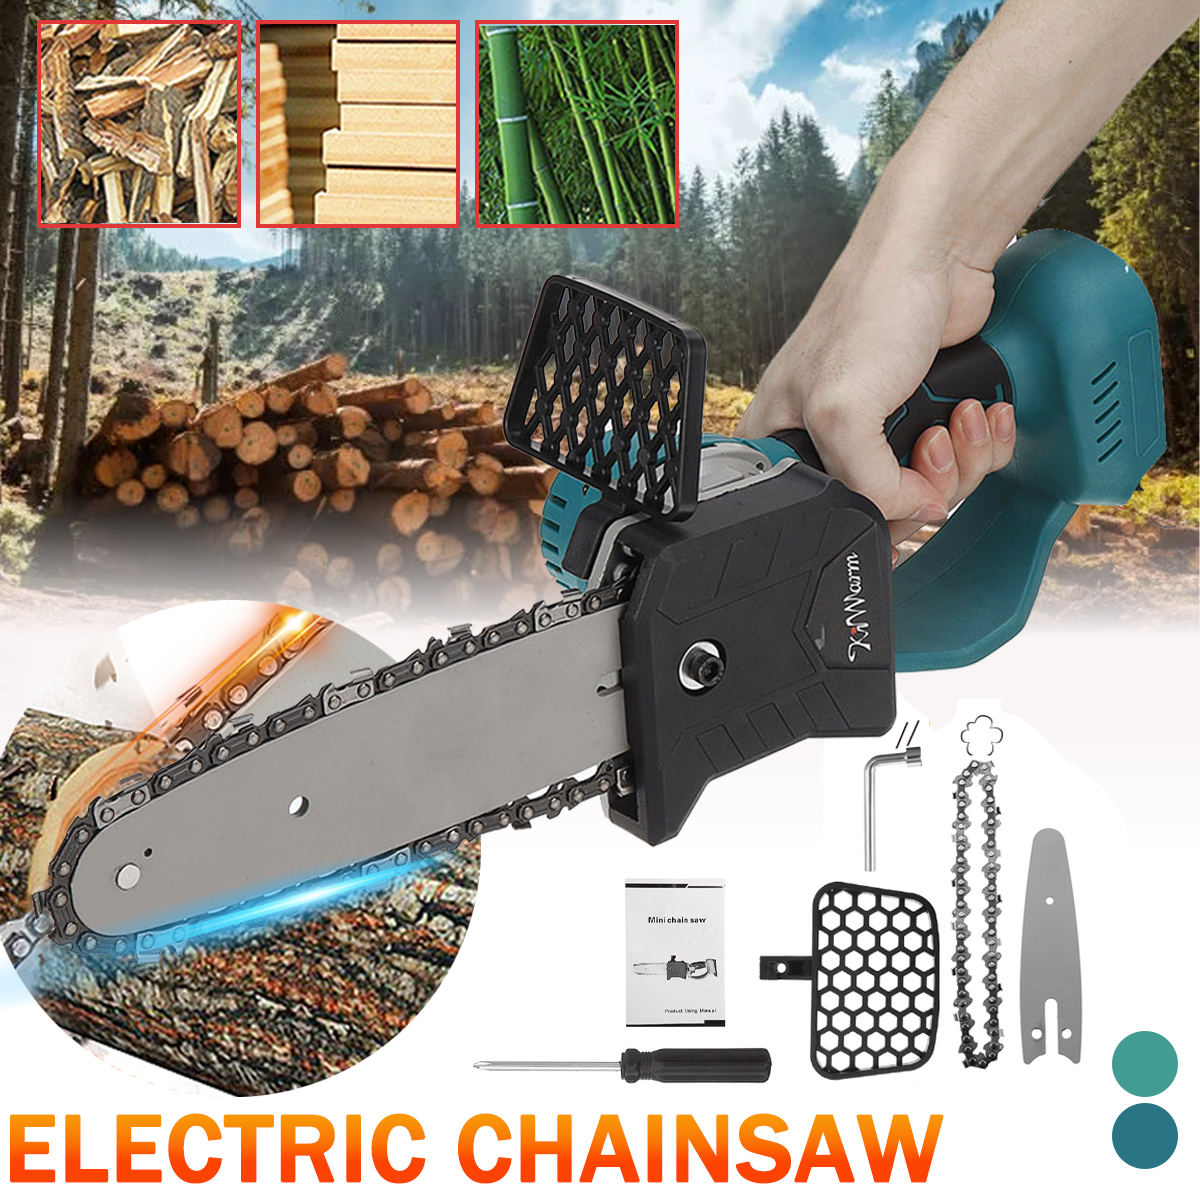 KIWARM-8-Inch-Portable-Electric-Saw-Pruning-Chain-Saw-Rechargeable-Woodworking-Power-Tools-Wood-Cutt-1917450-1